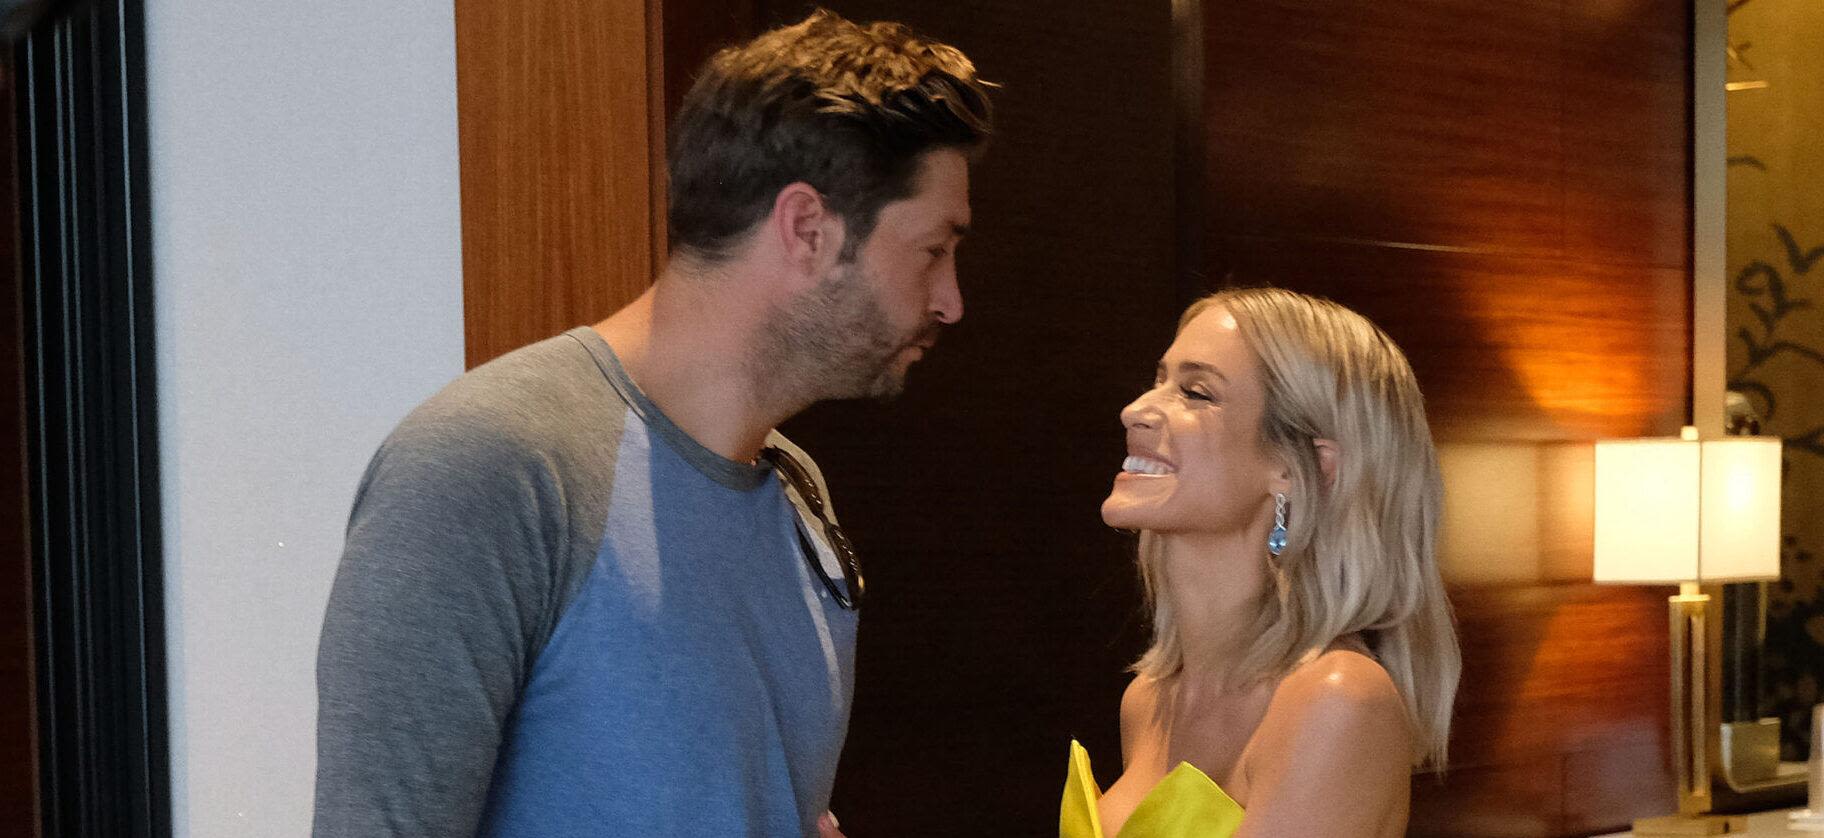 Jay Cutler Offloads Final Memory Of Kristin Cavallari Marriage With $3.1 Million Loss